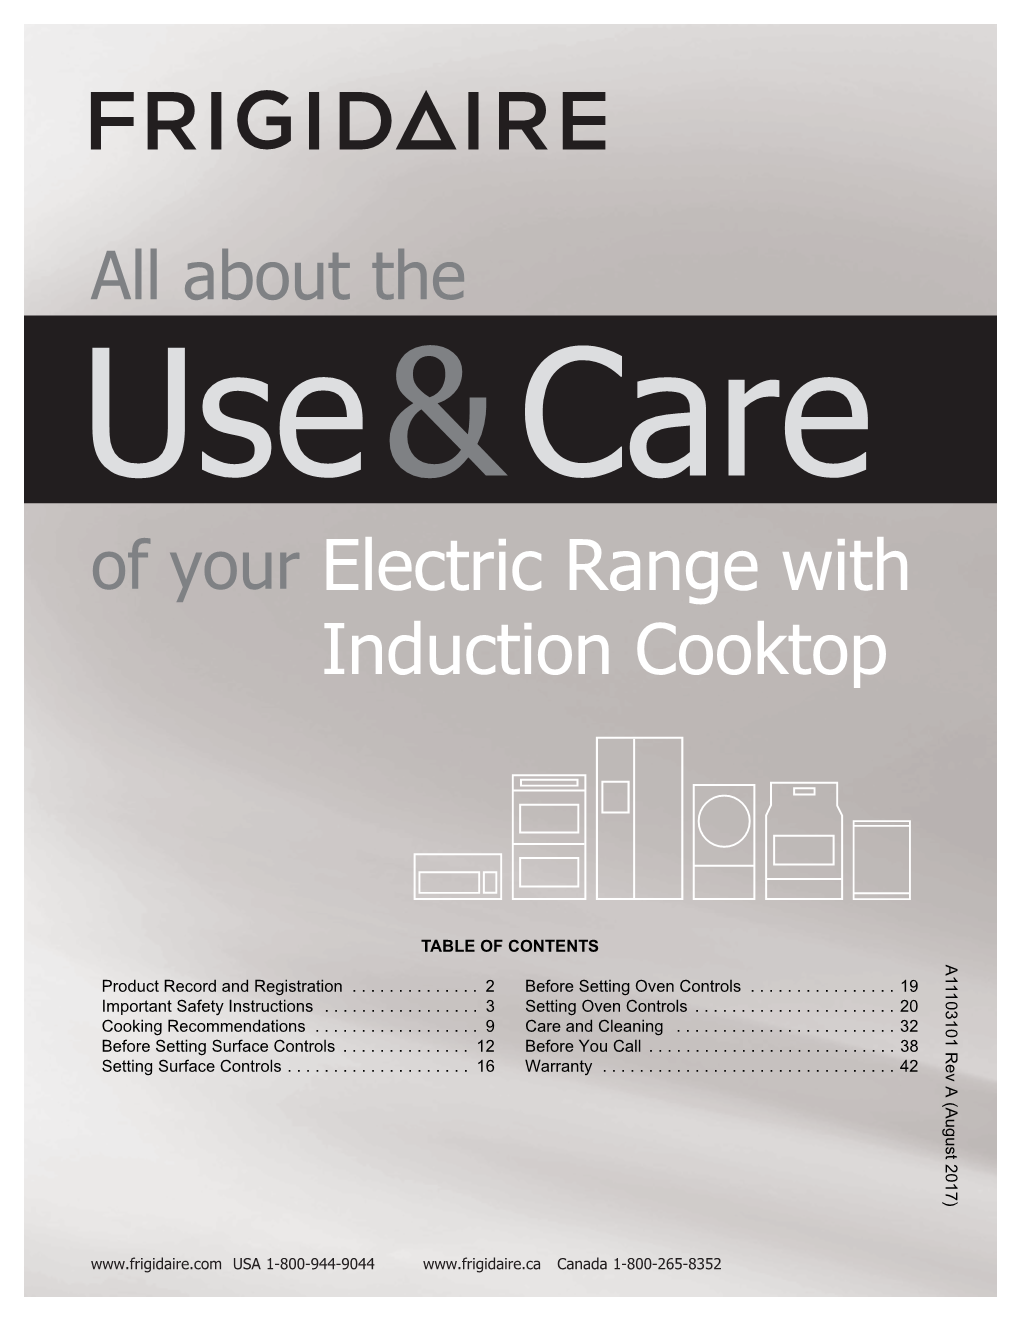 Electric Range with Induction Cooktop